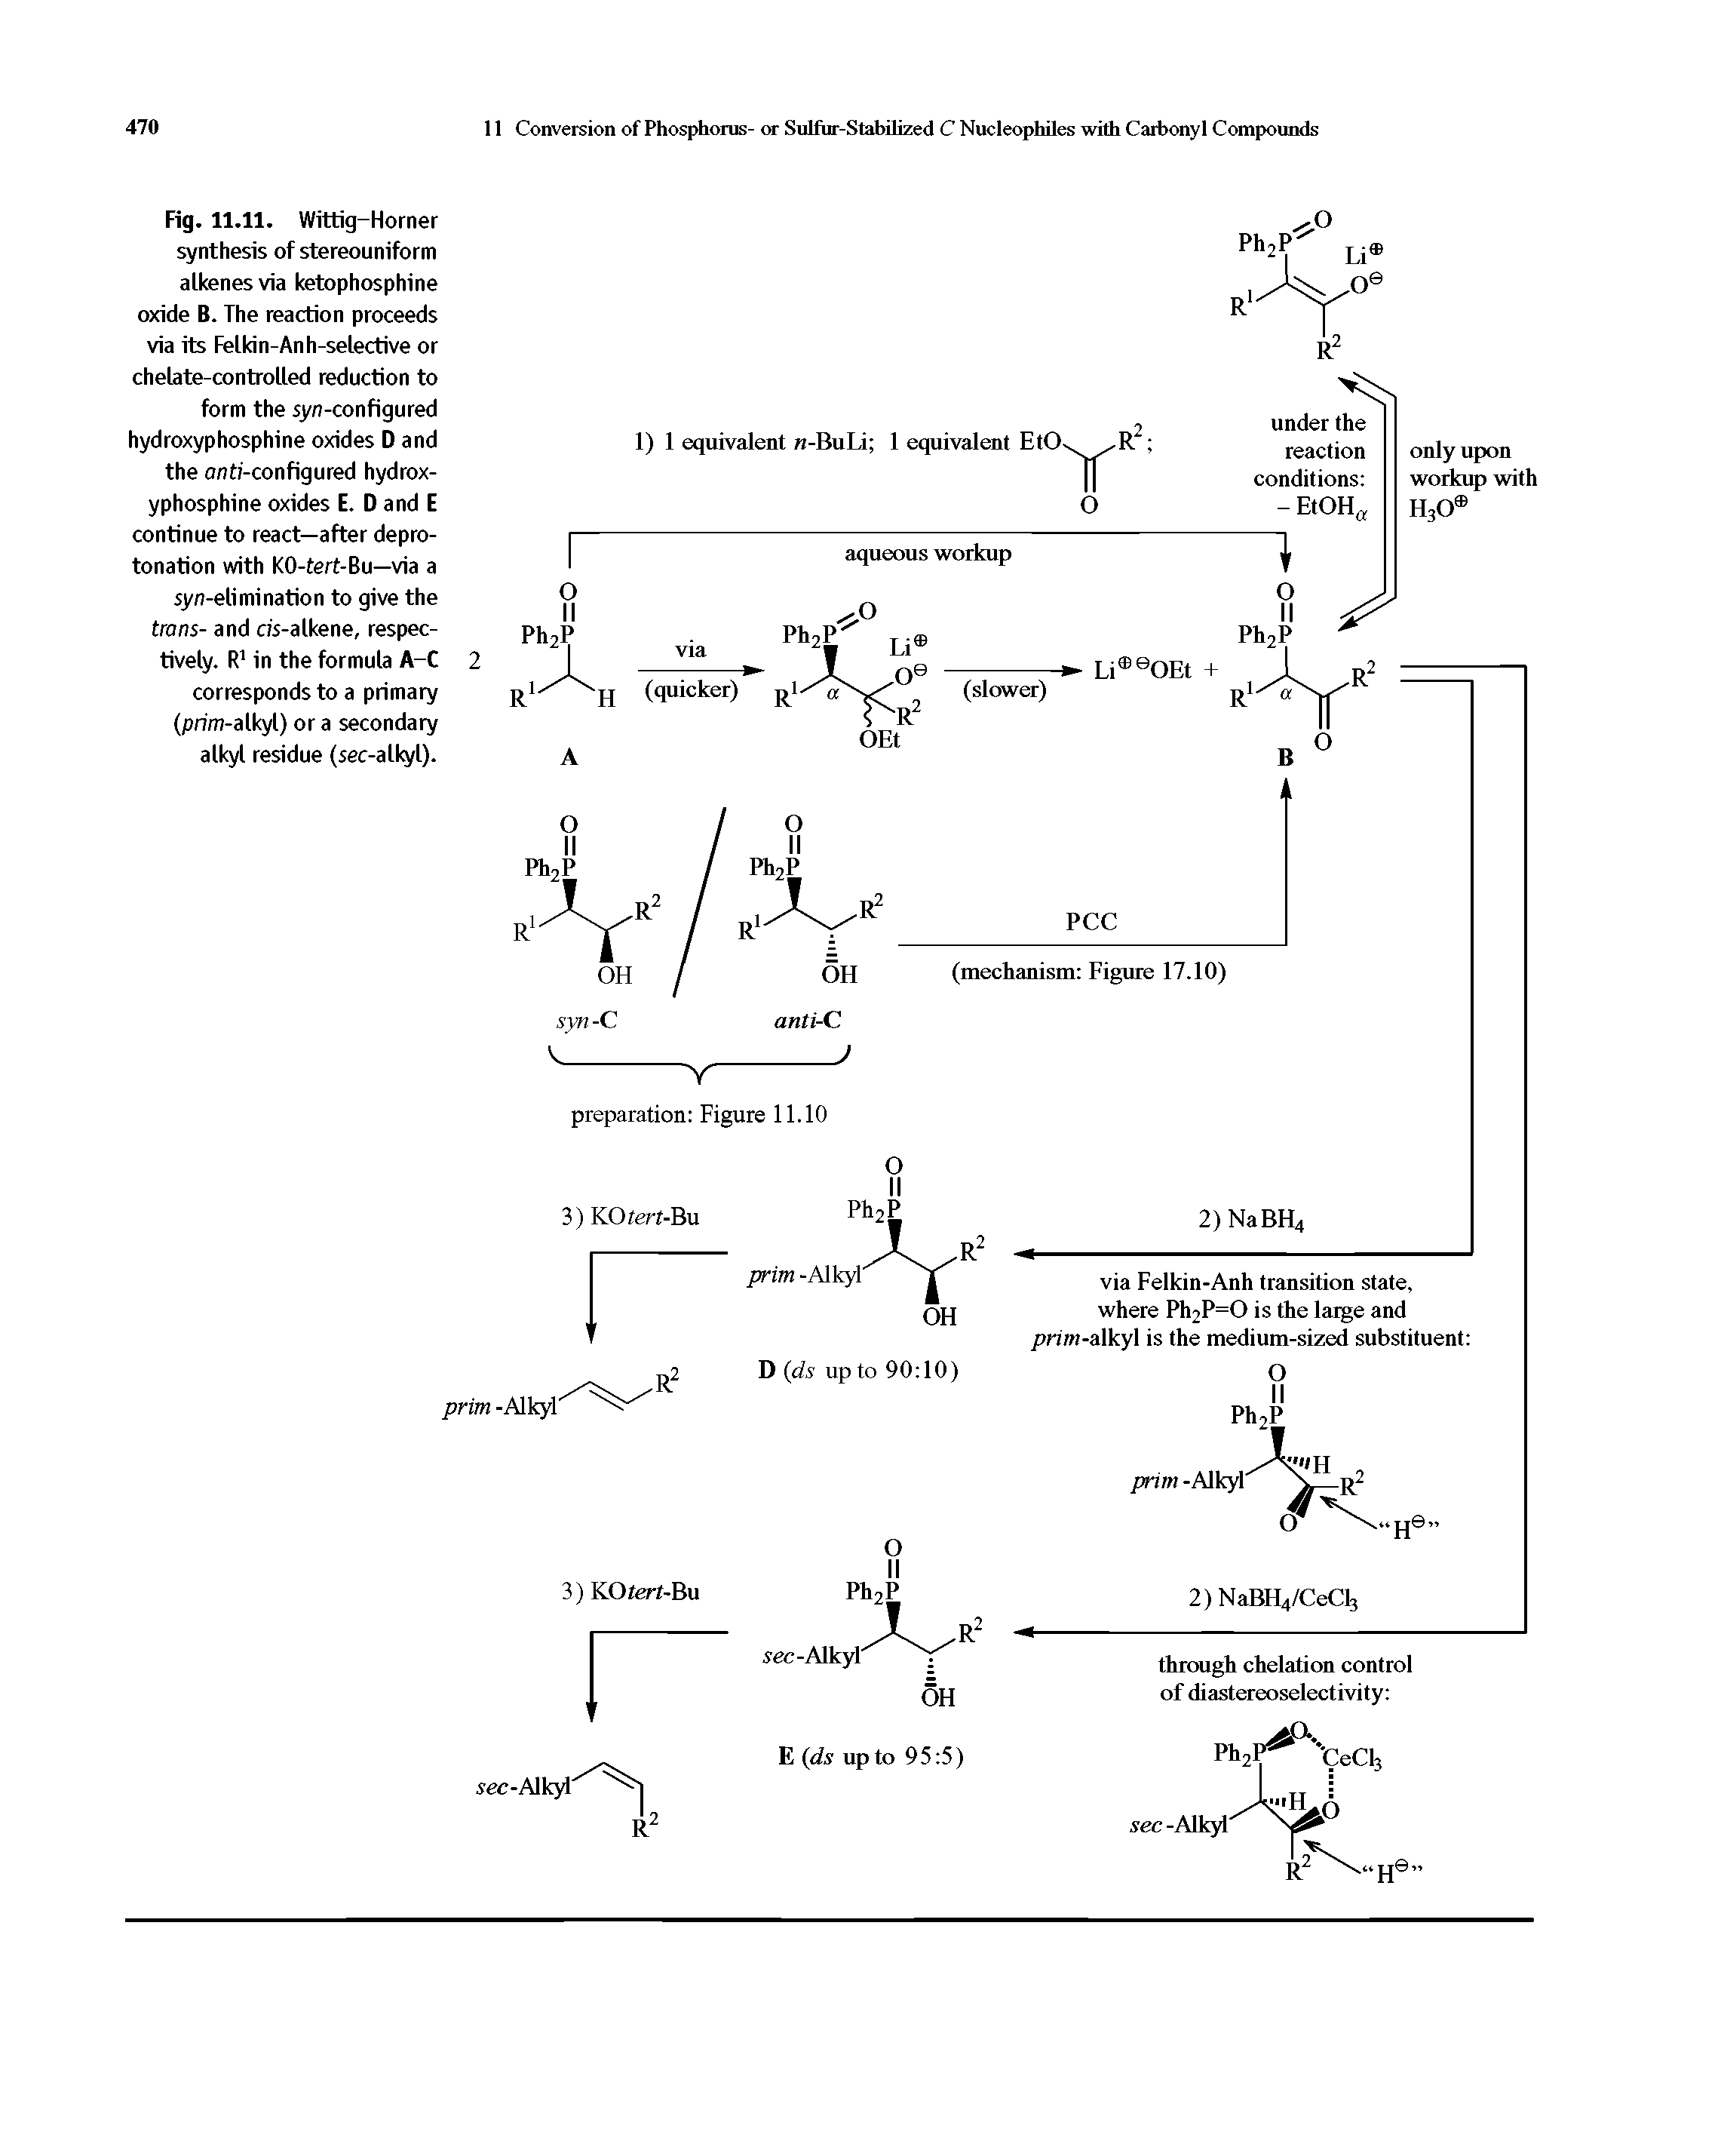 Fig. 11.11. Wittig-Horner synthesis of stereouniform alkenes via ketophosphine oxide B. The reaction proceeds via its Felkin-Anh-selective or chelate-controlled reduction to form the syn-configured hydroxyphosphine oxides D and the anti-configured hydroxyphosphine oxides E. D and E continue to react—after deprotonation with KO-tert-Bu—via a syn-elimination to give the trans- and cis-alkene, respectively. R1 in the formula A-C corresponds to a primary (prim-alkyl) or a secondary alkyl residue (sec-altyl).